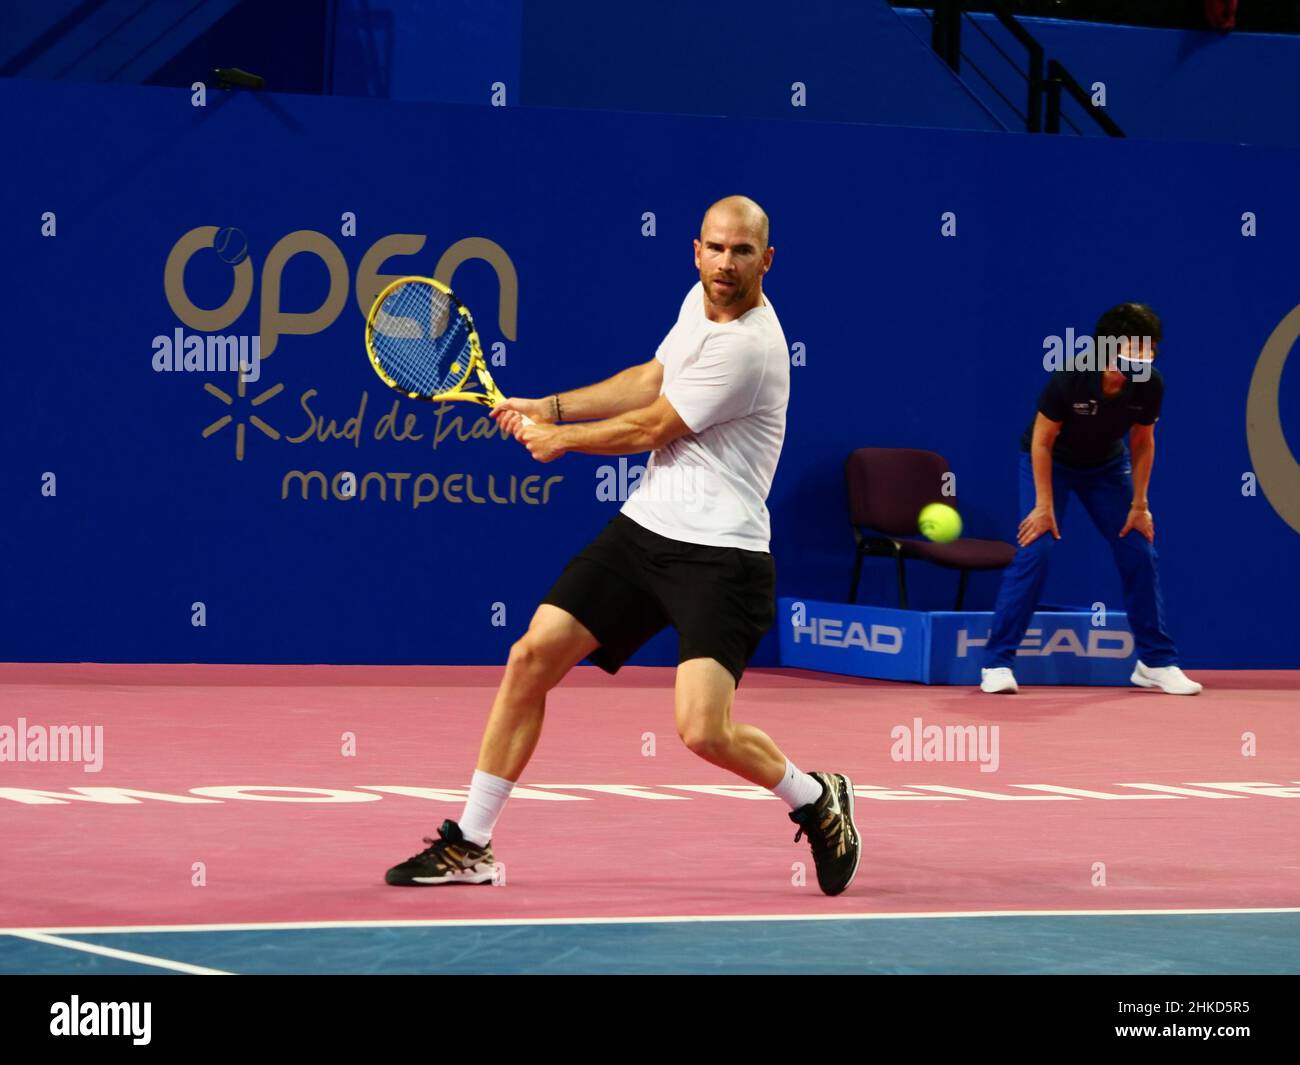 Adrian Mannarino of France in action against David Goffin of Belgium during the Open Sud de, France